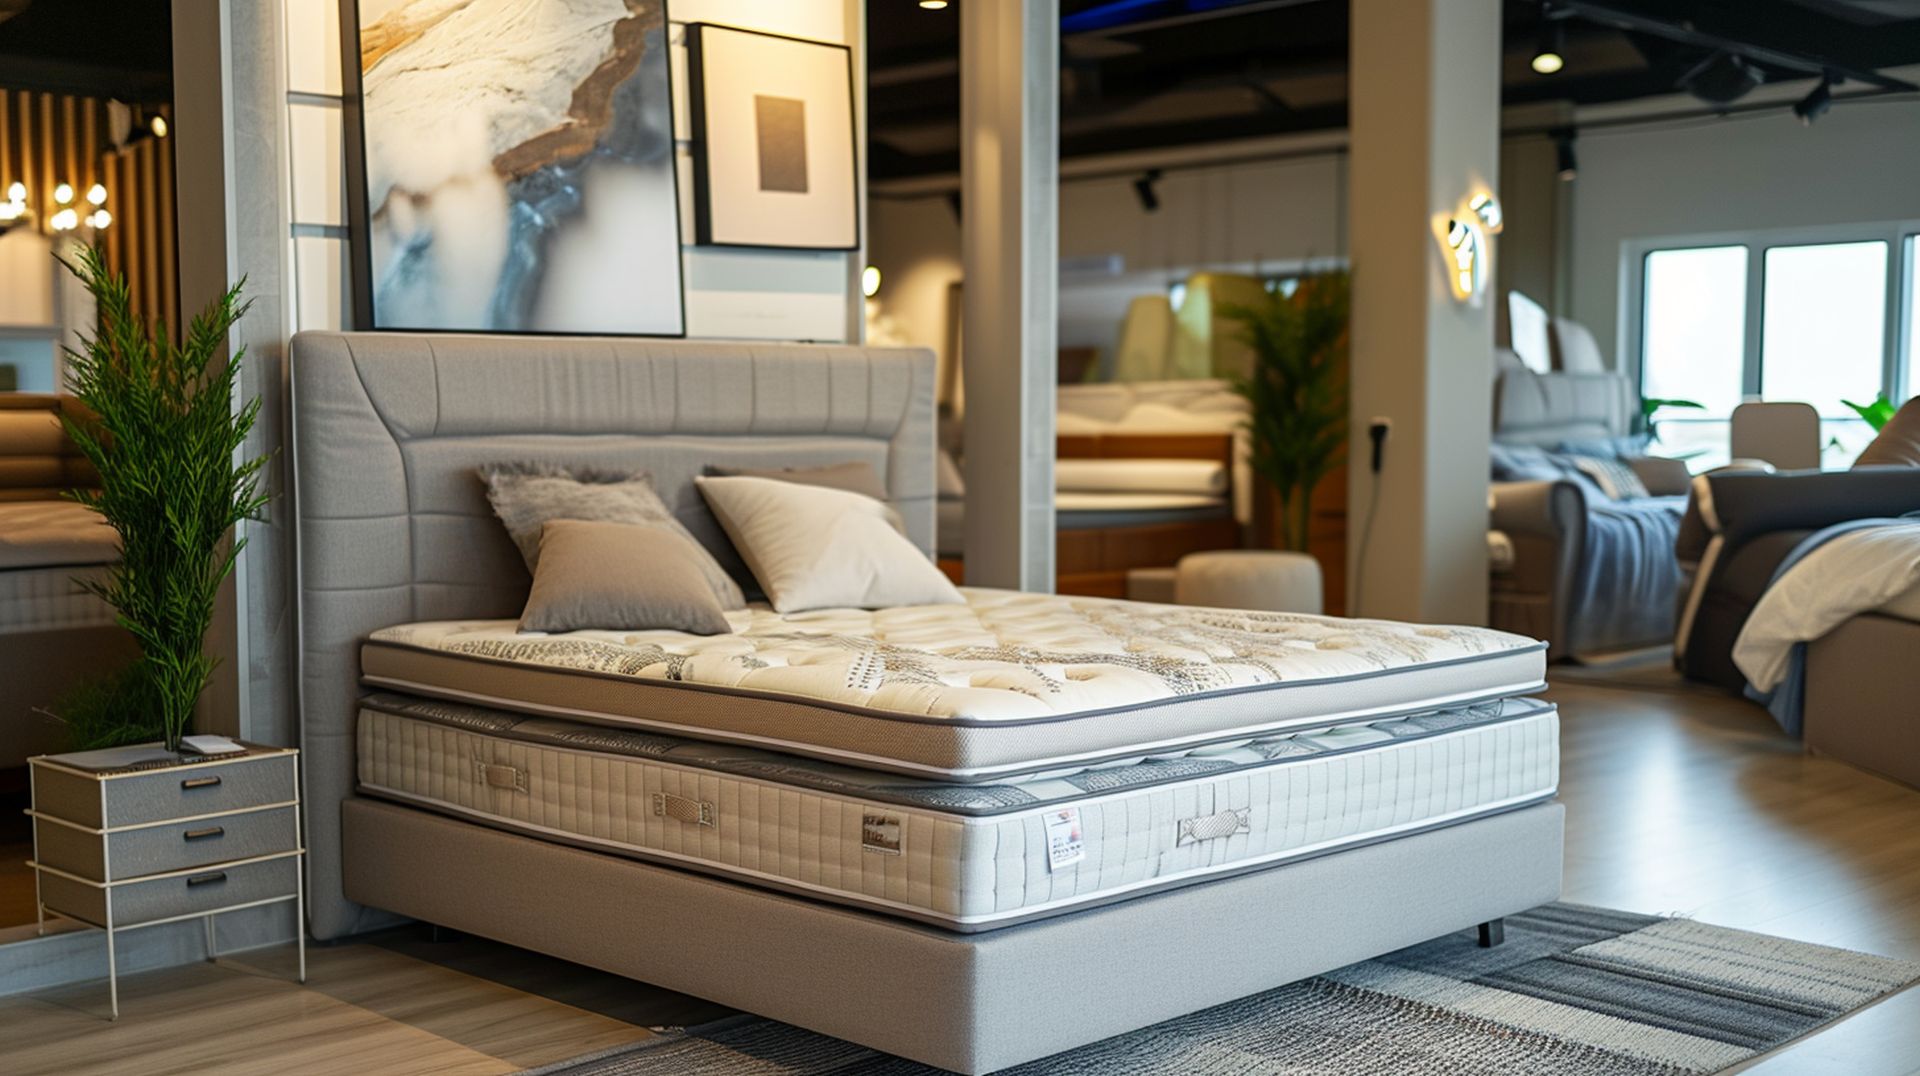 Local Lakewood mattress stores have the best prices, sales, and deals if you're looking for a new mattress in Lakewood